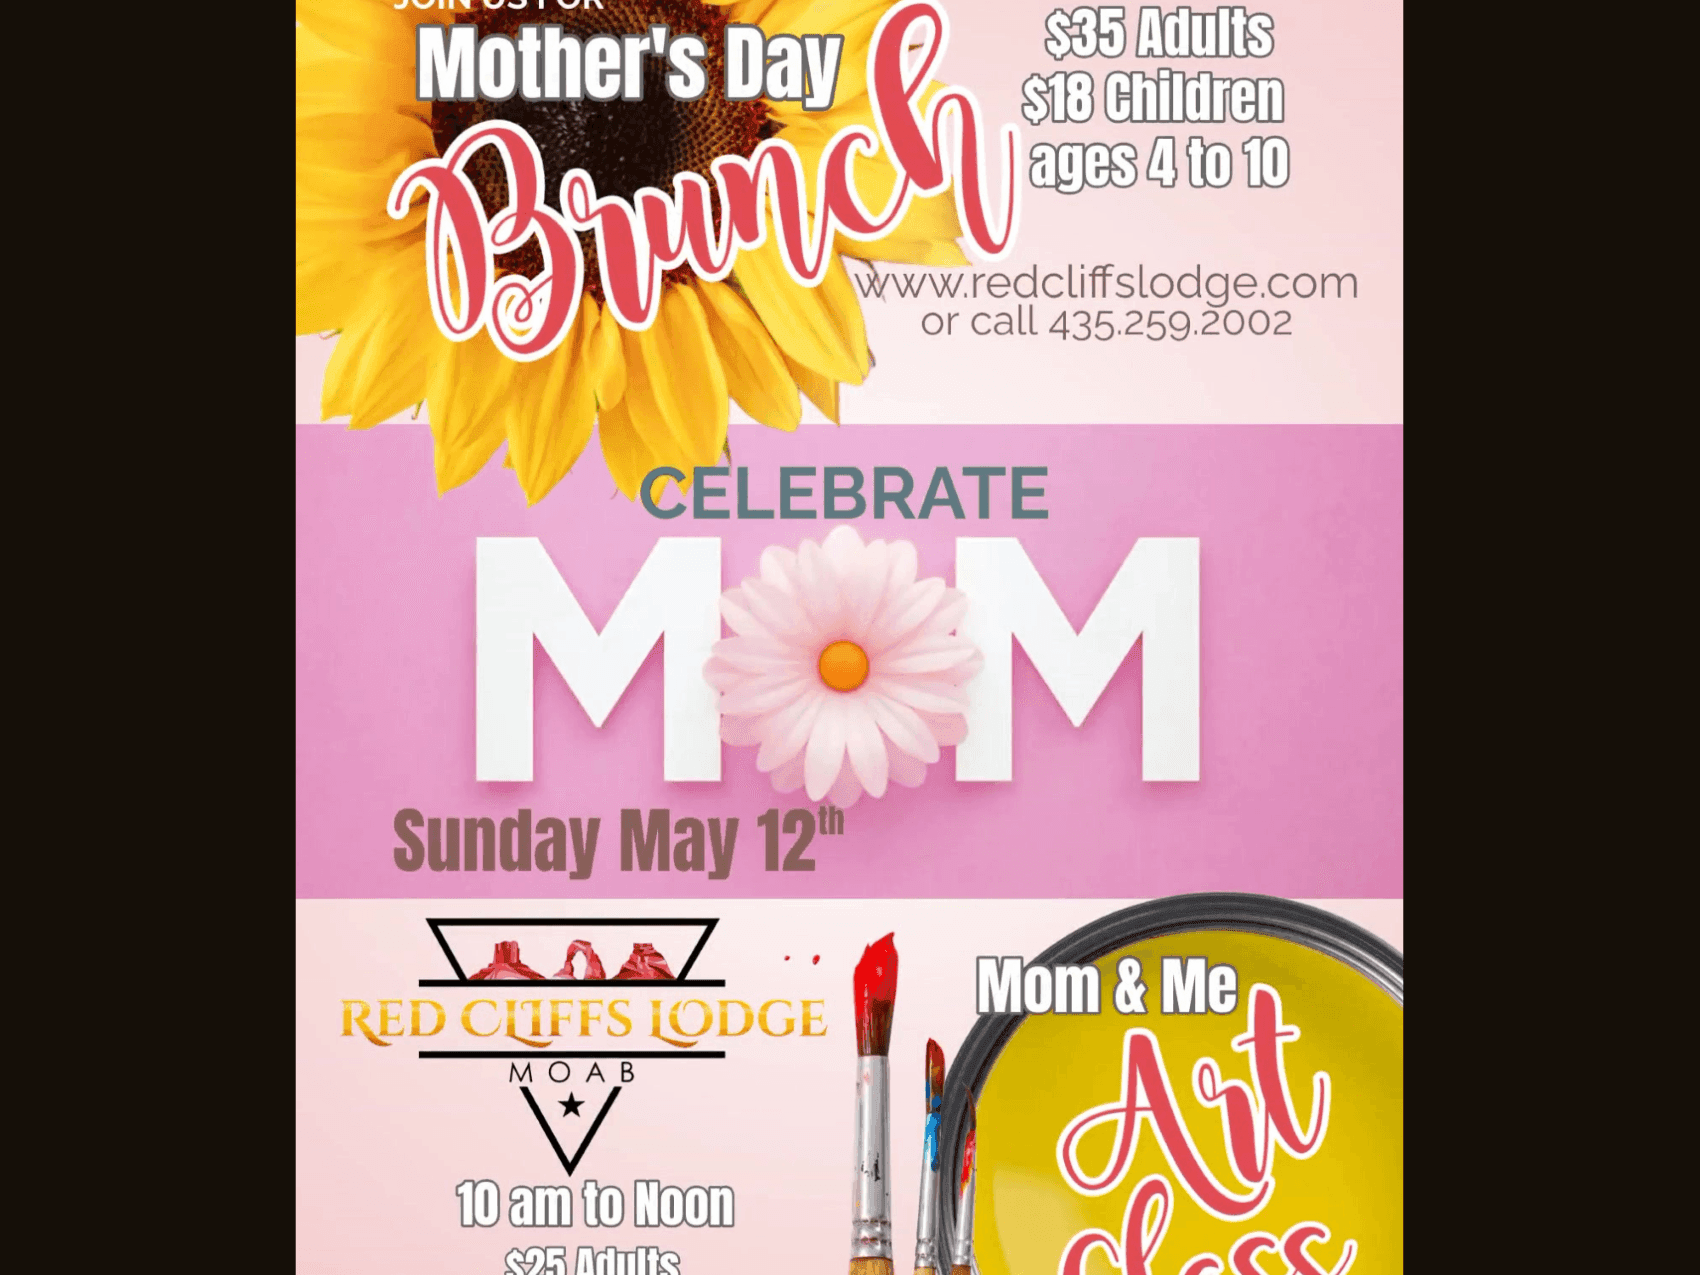 Celebrate Mom at Red Cliffs Lodge